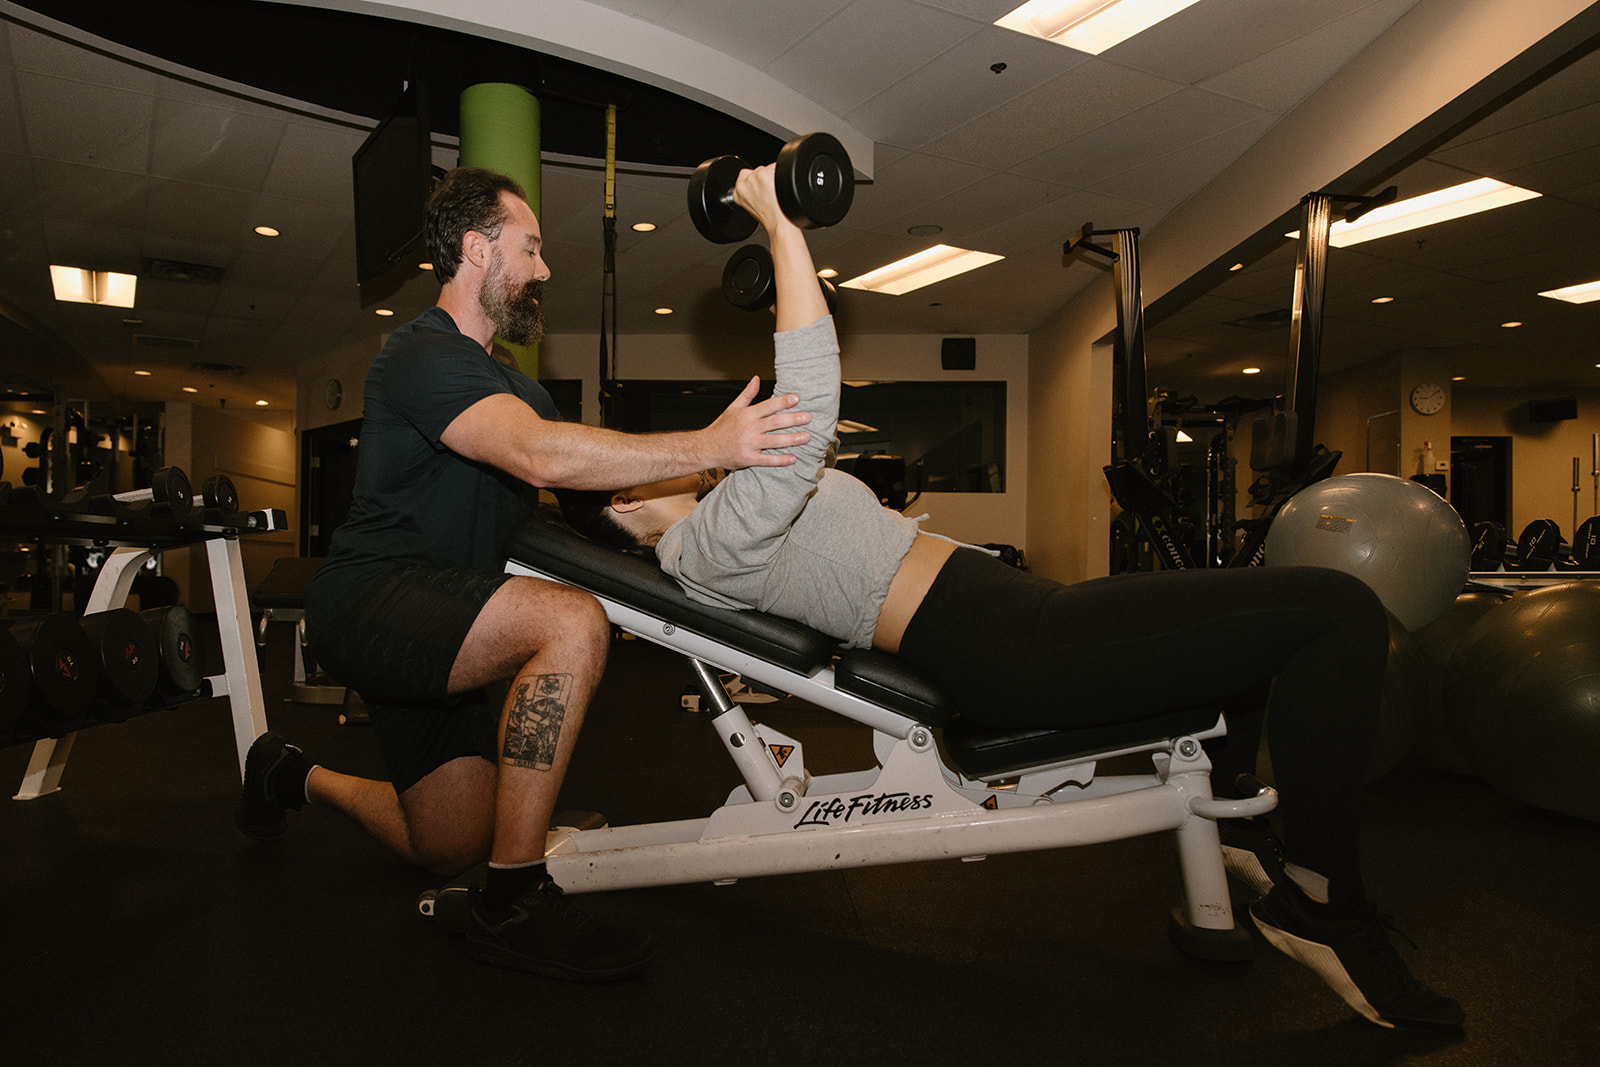 An image of a Vancouver personal trainer with a satisfied client, showcasing their positive reputation and reviews.